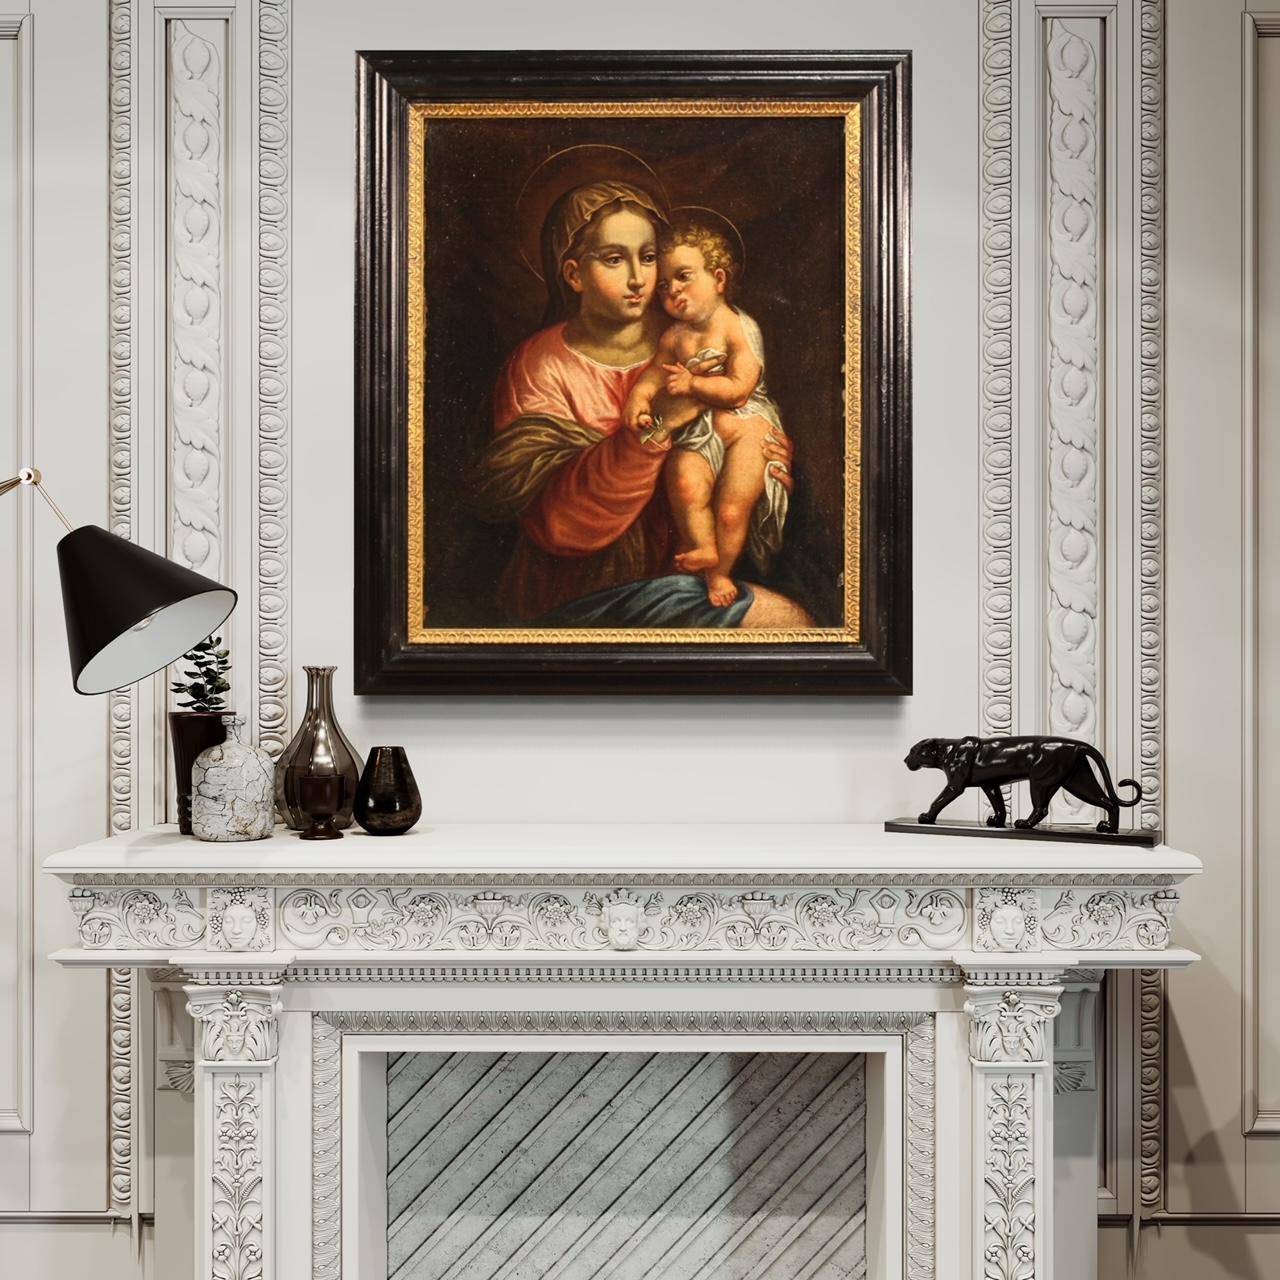 Antique Italian painting from the late 17th century. Framework oil on canvas depicting a religious subject Virgin with child of good pictorial quality. Framework of excellent proportion and quality finely represented in detail. Interesting is the